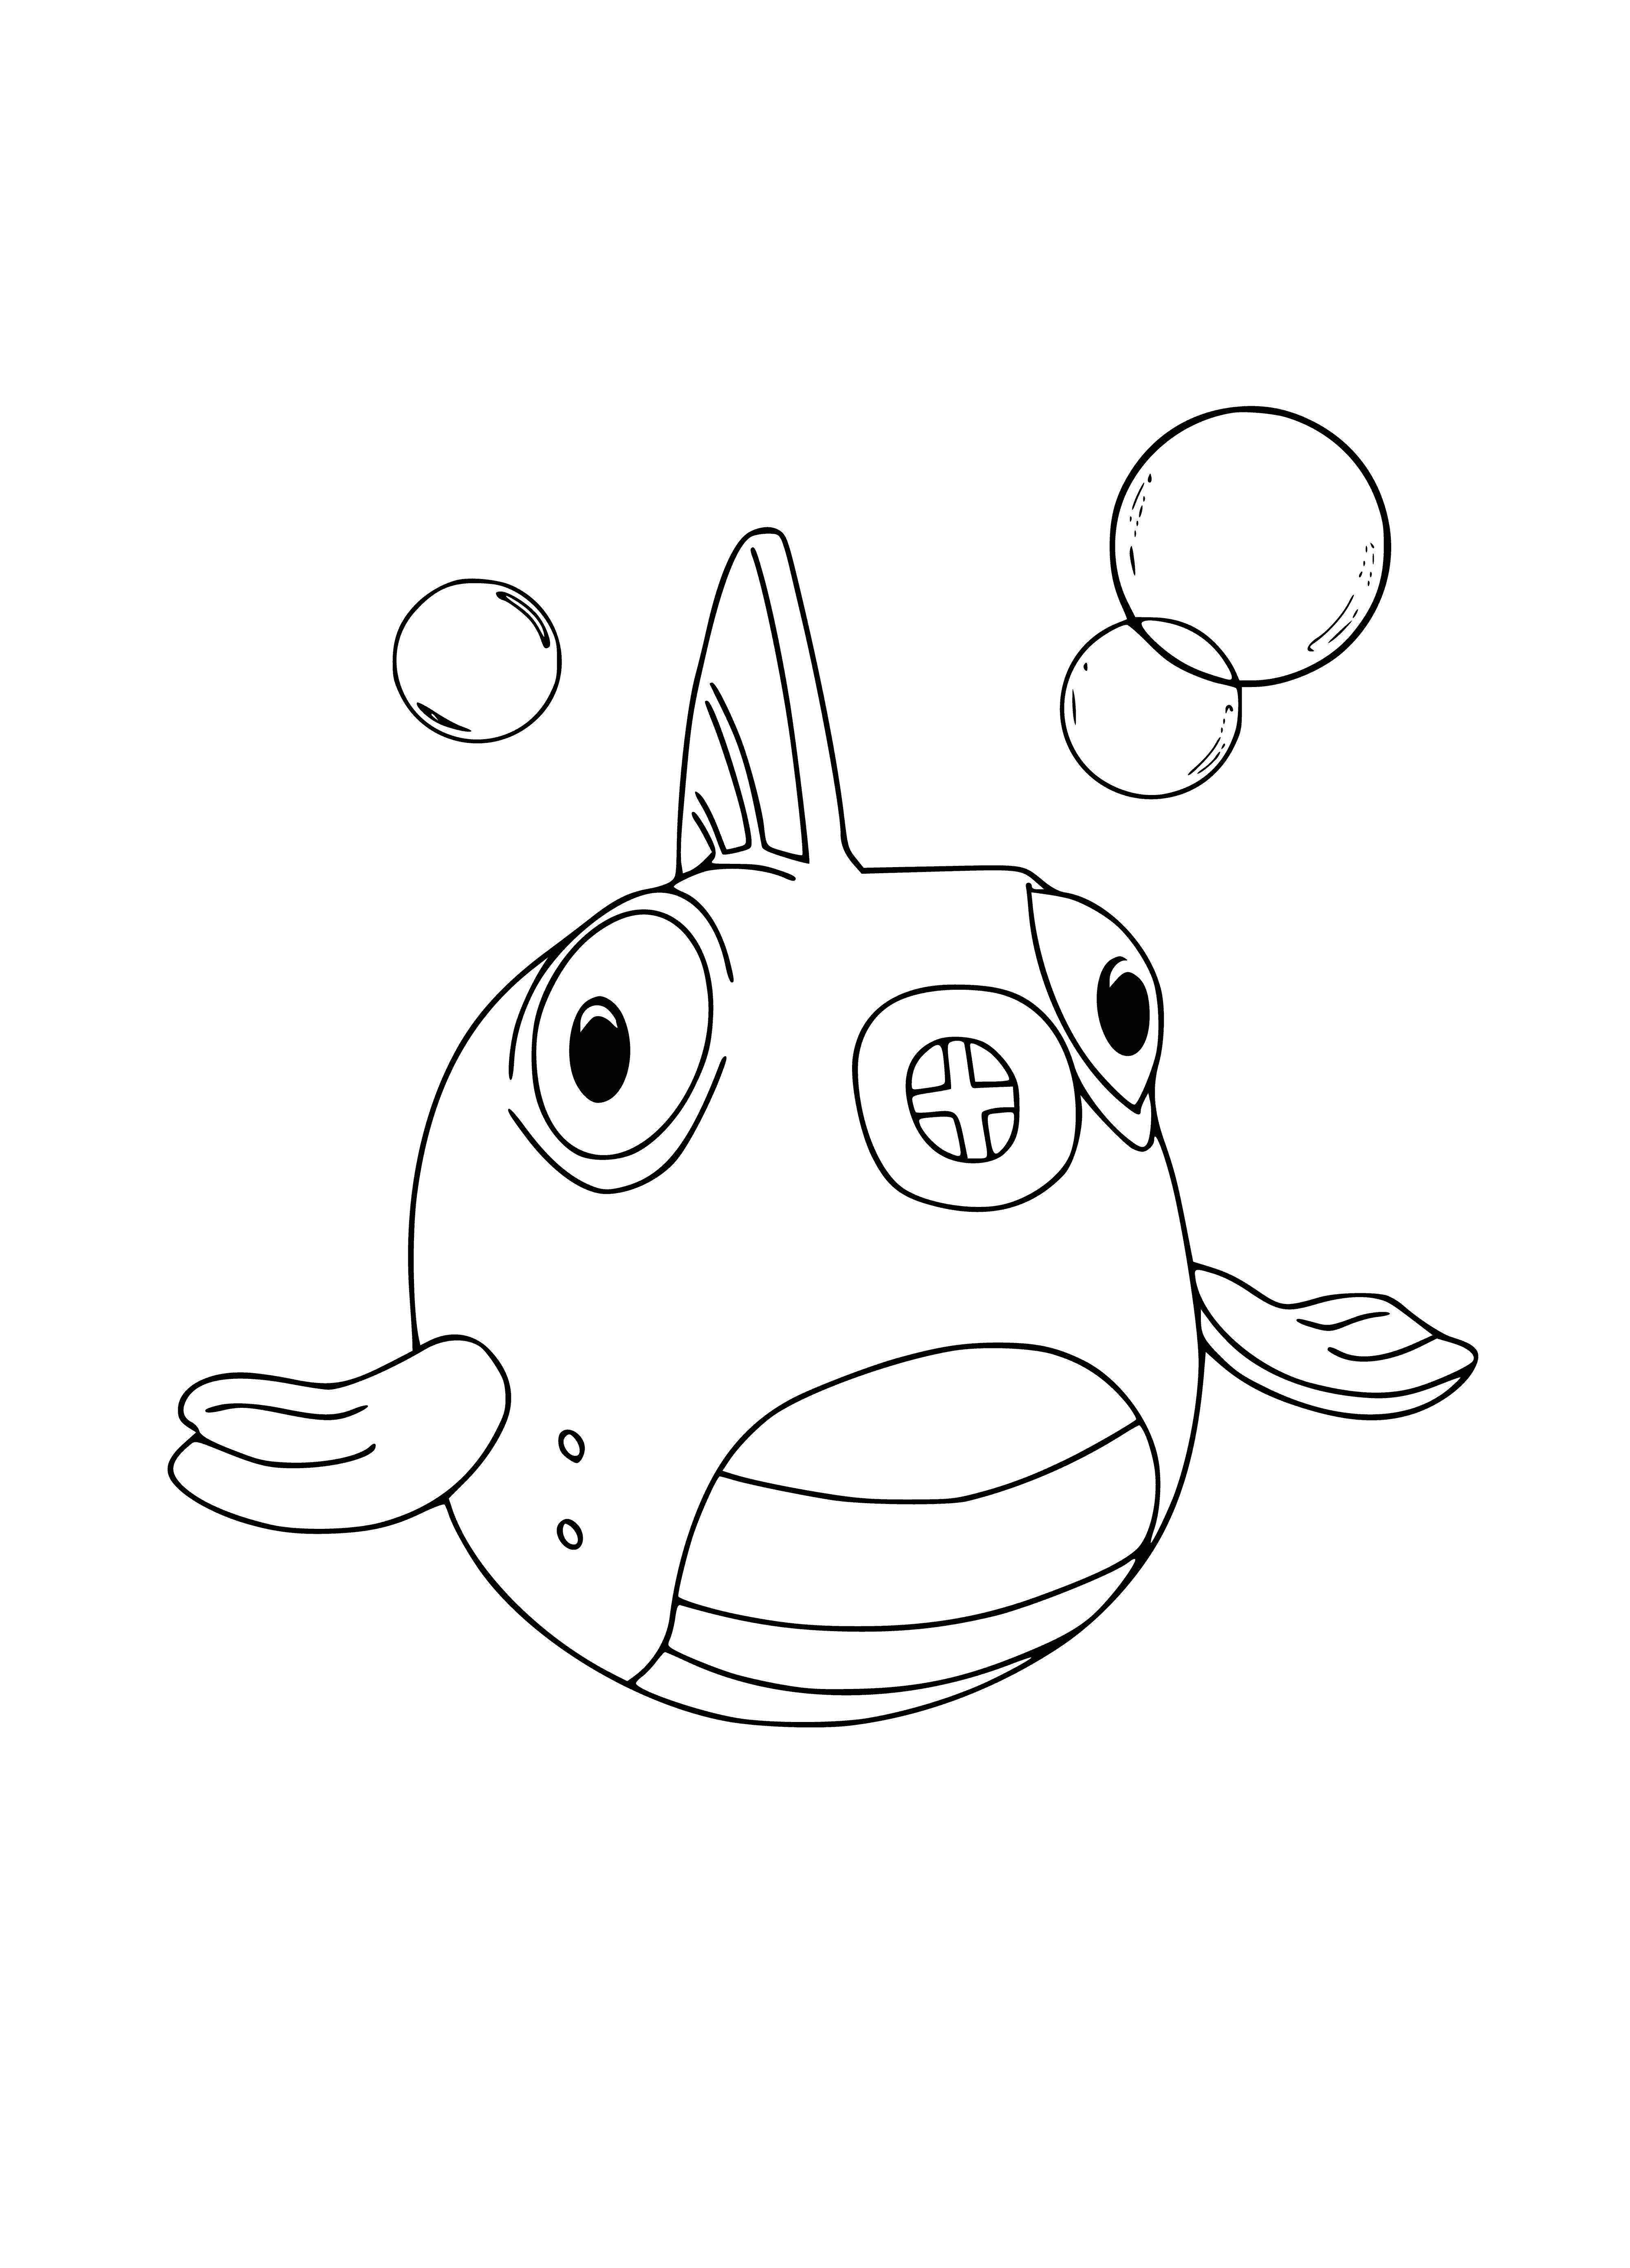 coloring page: A pink and purple fish with a bandage and yellow star on its head & two blue eyes.